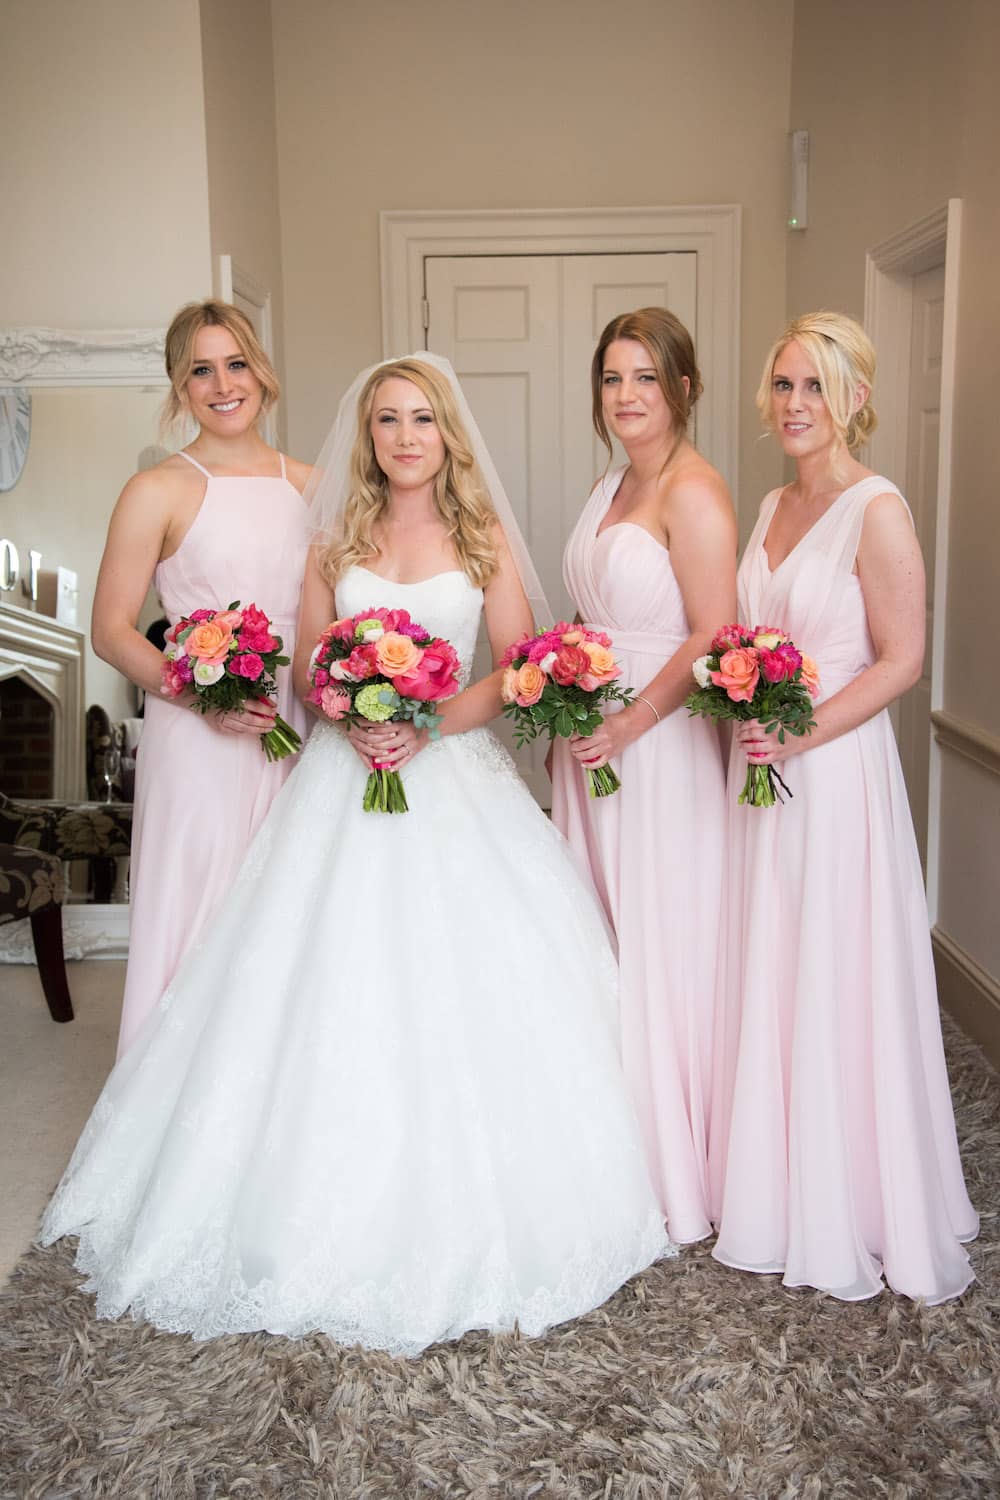 peach, coral and pink bouquets with blush bridesmaids dresses